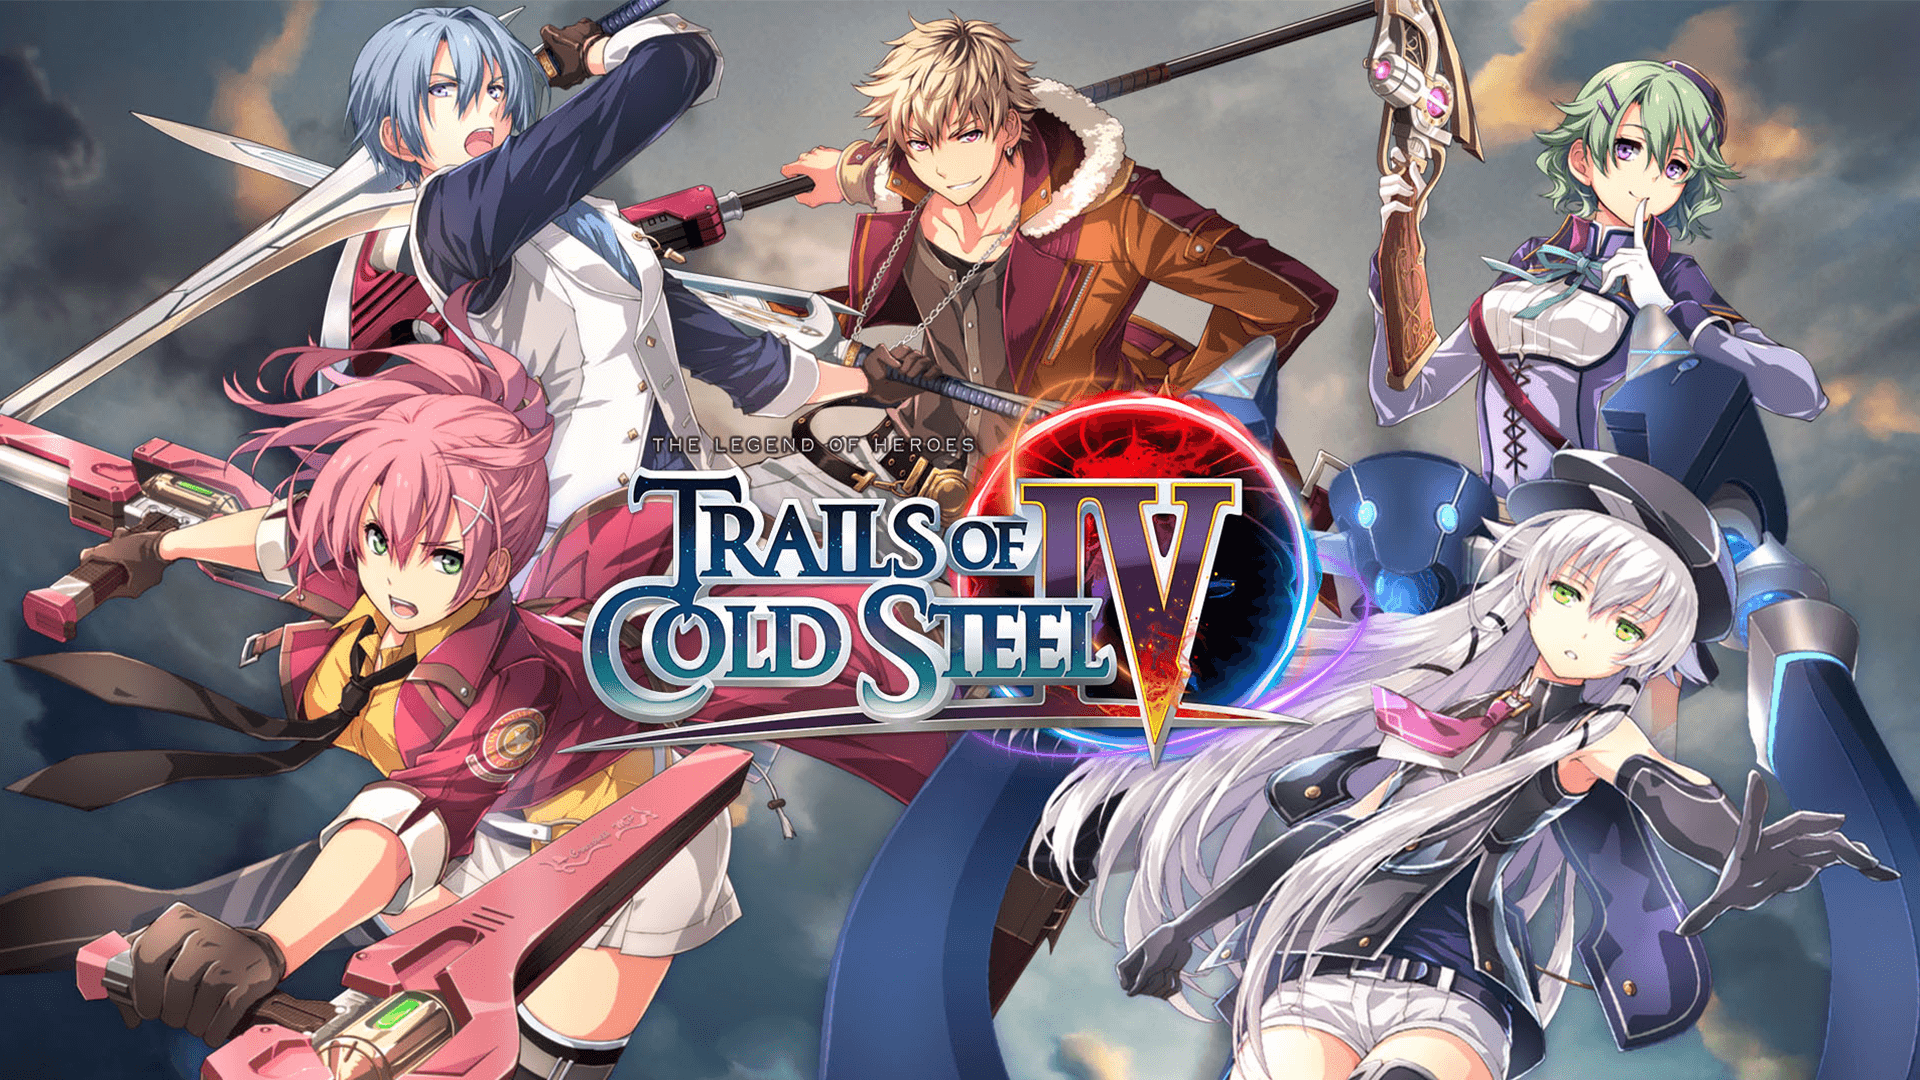 Trails Of Cold Steel IV: Nintendo Switch Port Releases April 9 - The Legend of Heroes